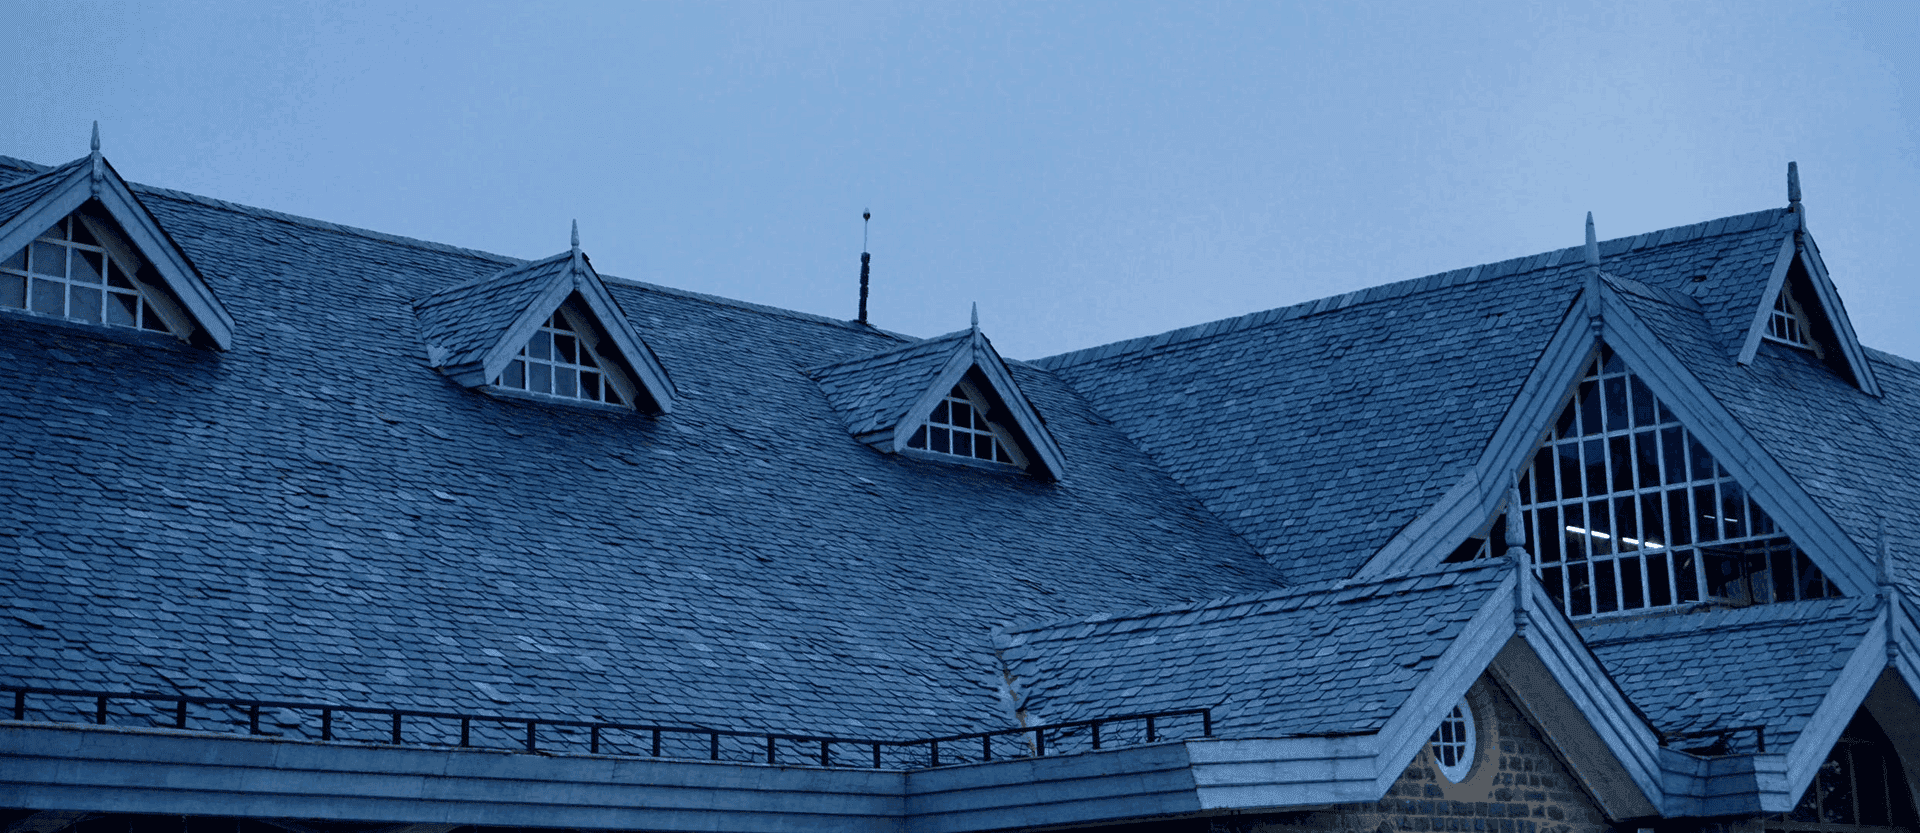 A large roof with shingles and gutter guards, taken at twilight